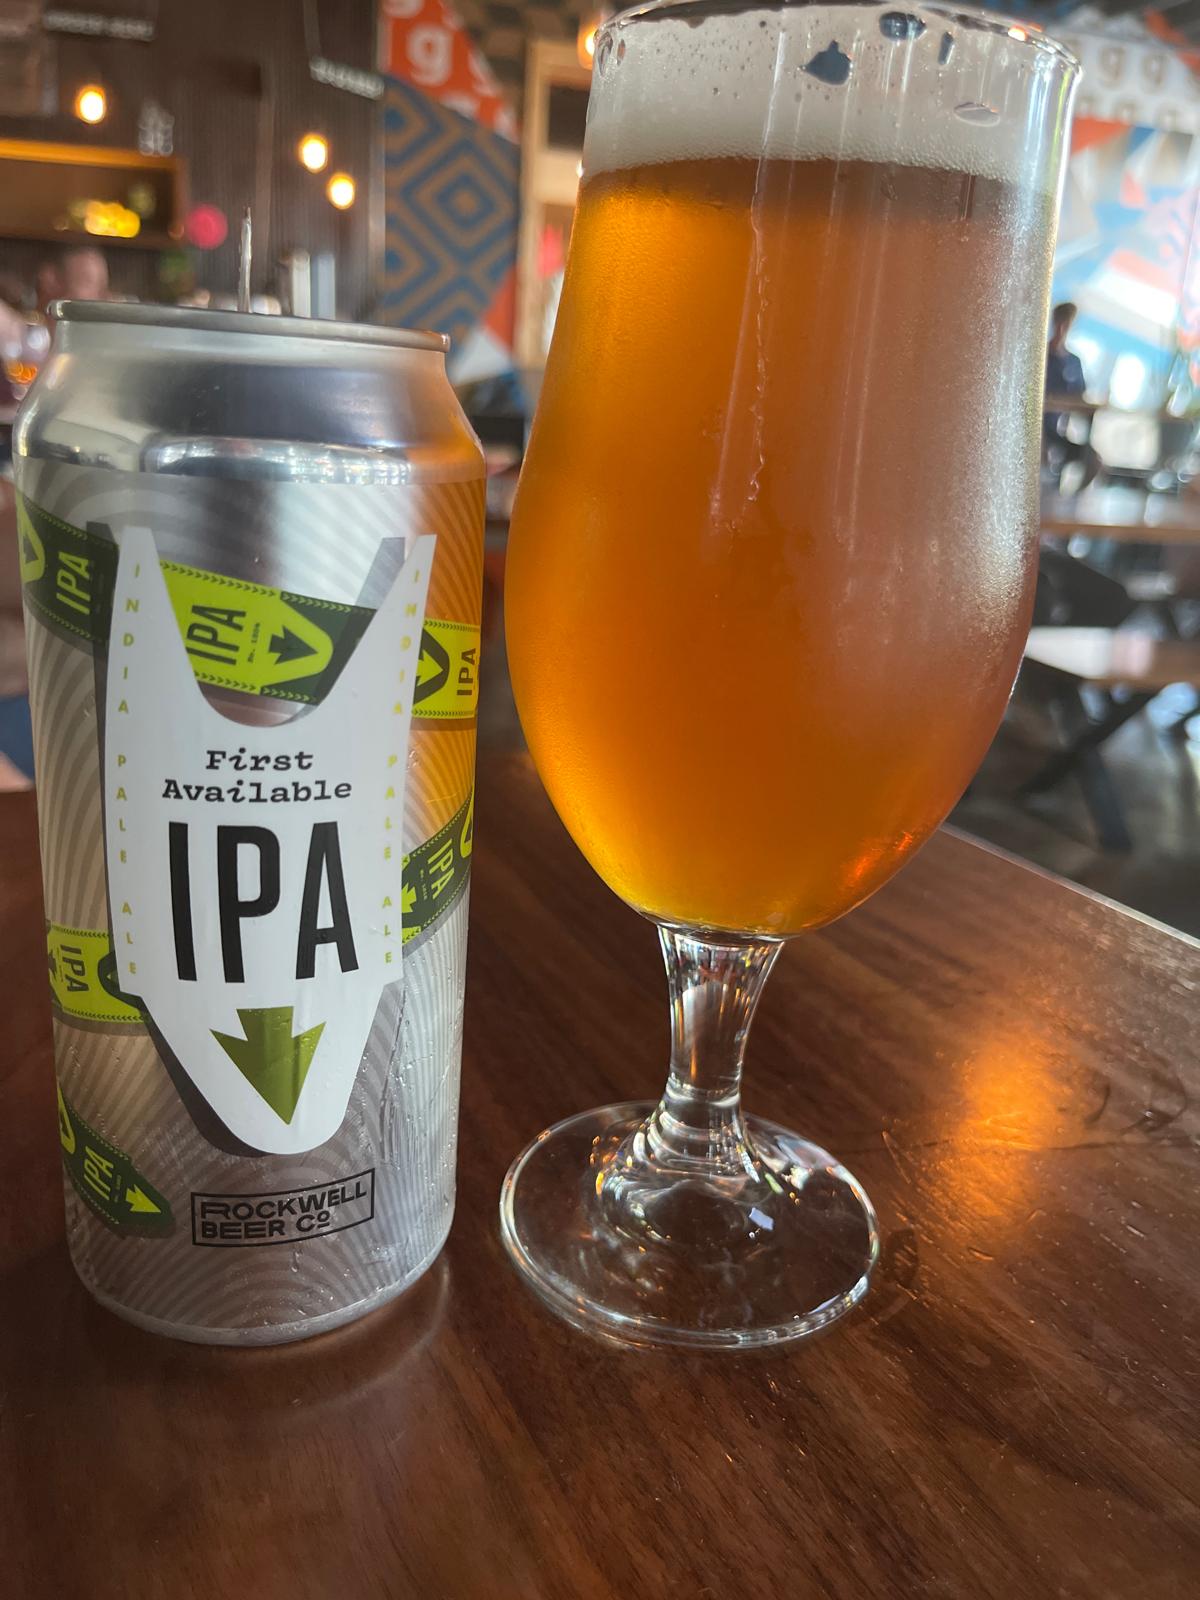 First Available IPA